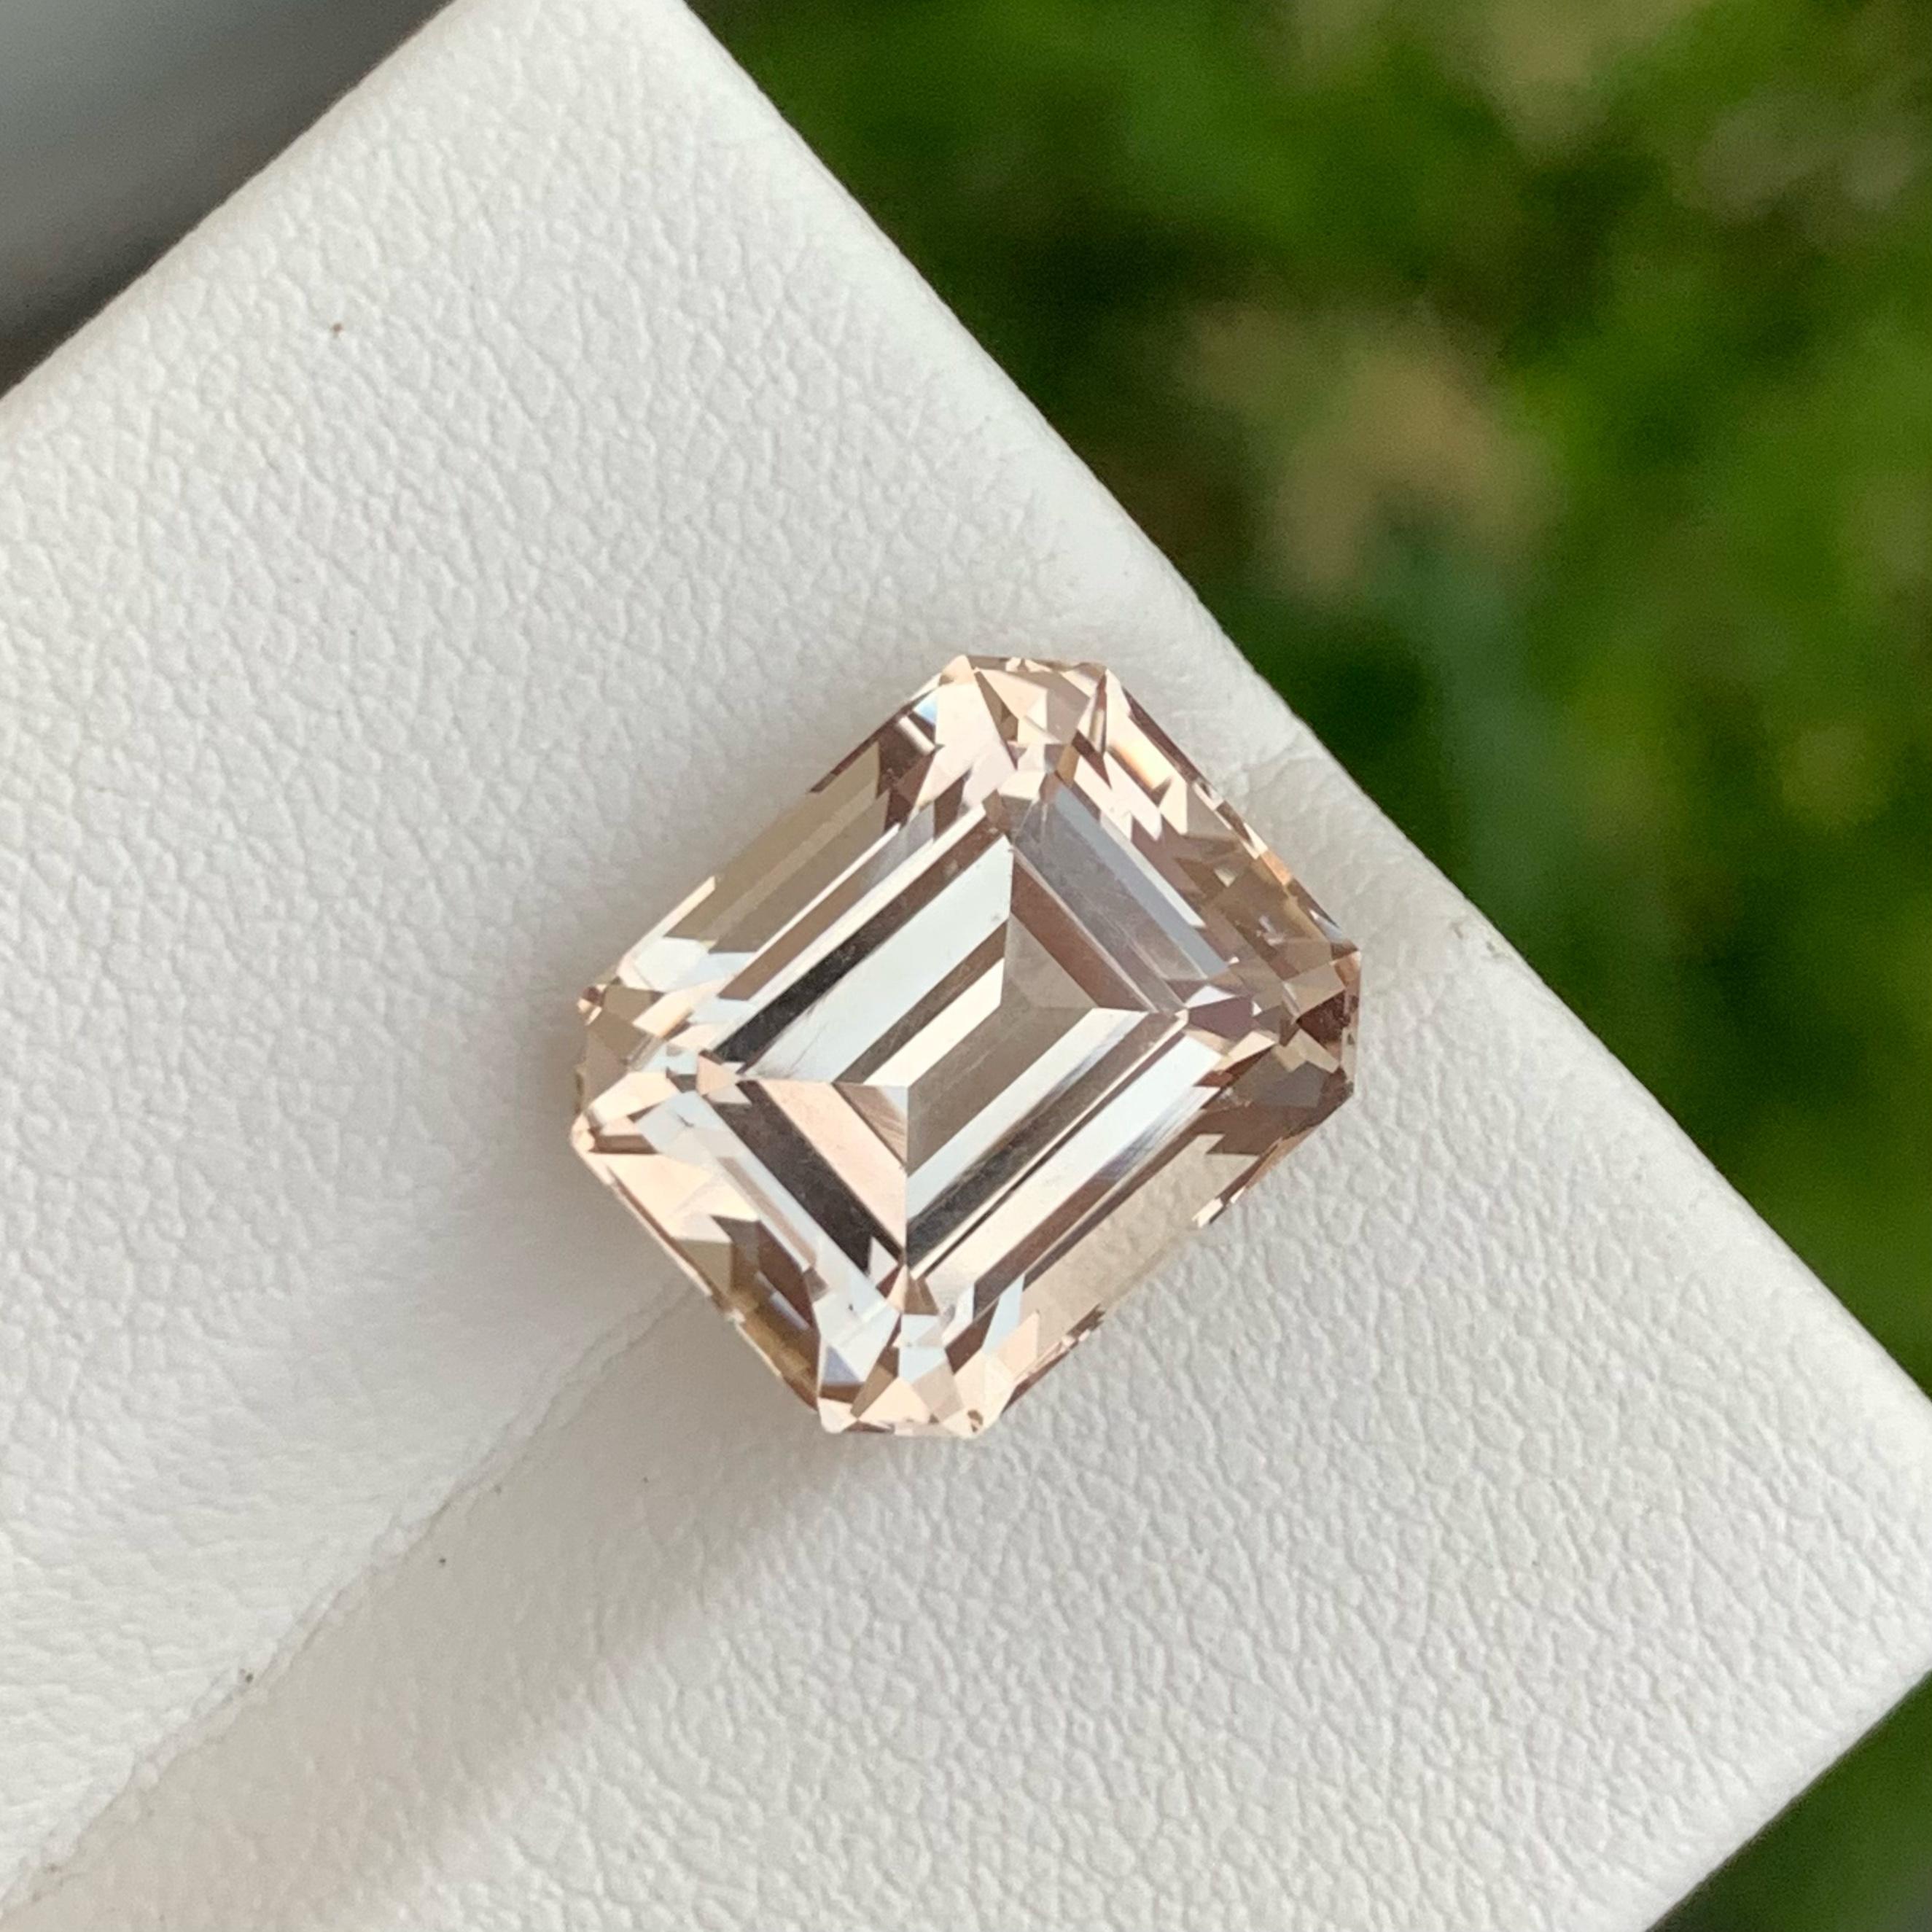 Women's or Men's Flawless Imperial Topaz 11.40 carats Emerald Cut Loose Natural Pakistani Gem For Sale